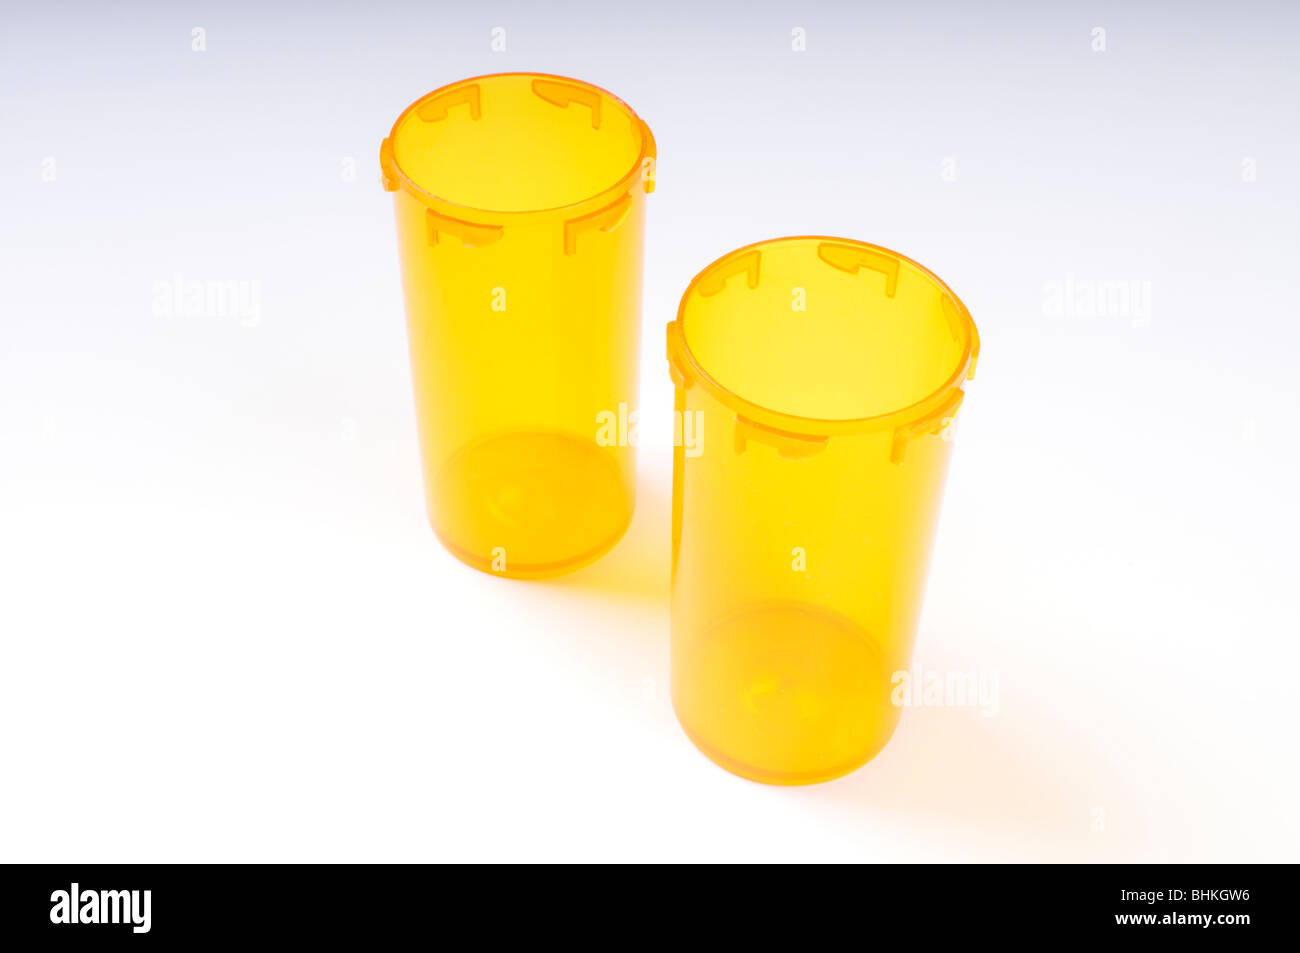 2 empty prescription pill bottles without covers and no labels on white background. Stock Photo